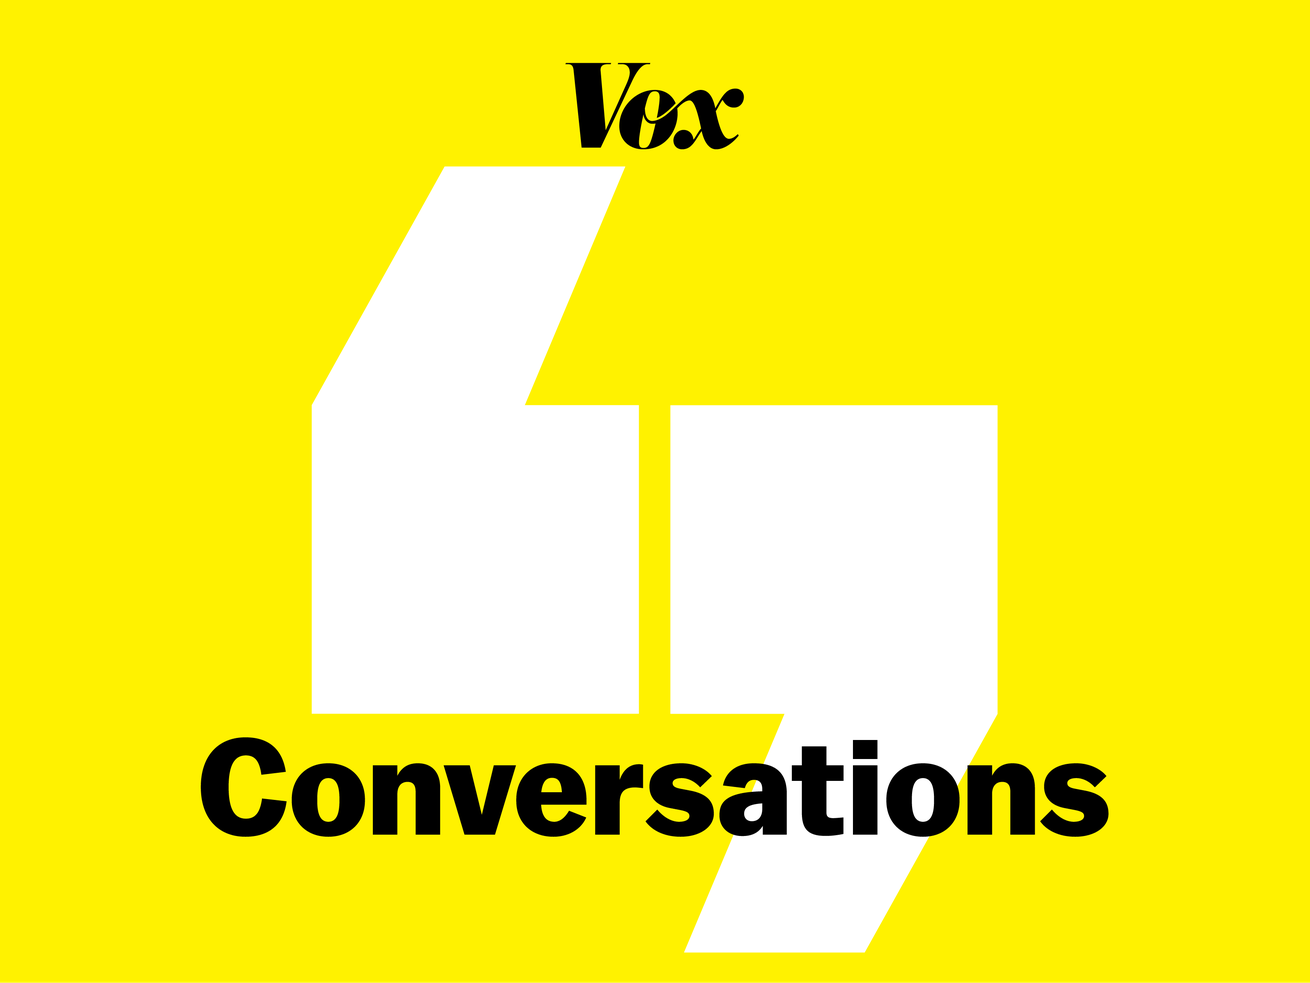 Vox Reintroduces Vox Conversations Podcast With New Hosts Sean Illing and Jamil Smith